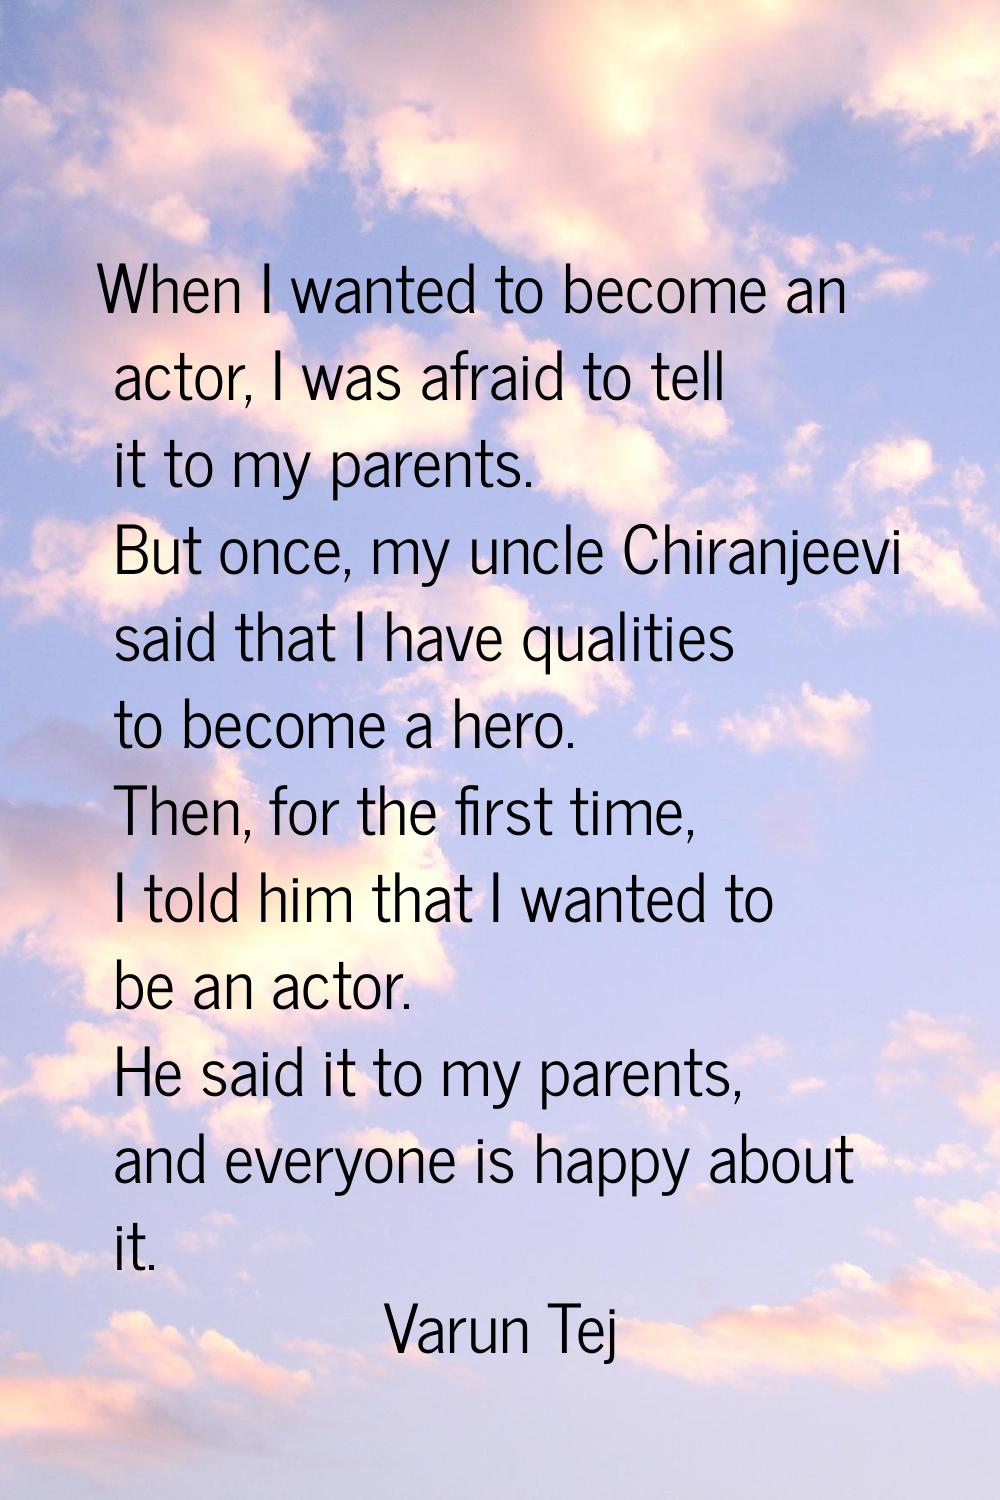 When I wanted to become an actor, I was afraid to tell it to my parents. But once, my uncle Chiranj